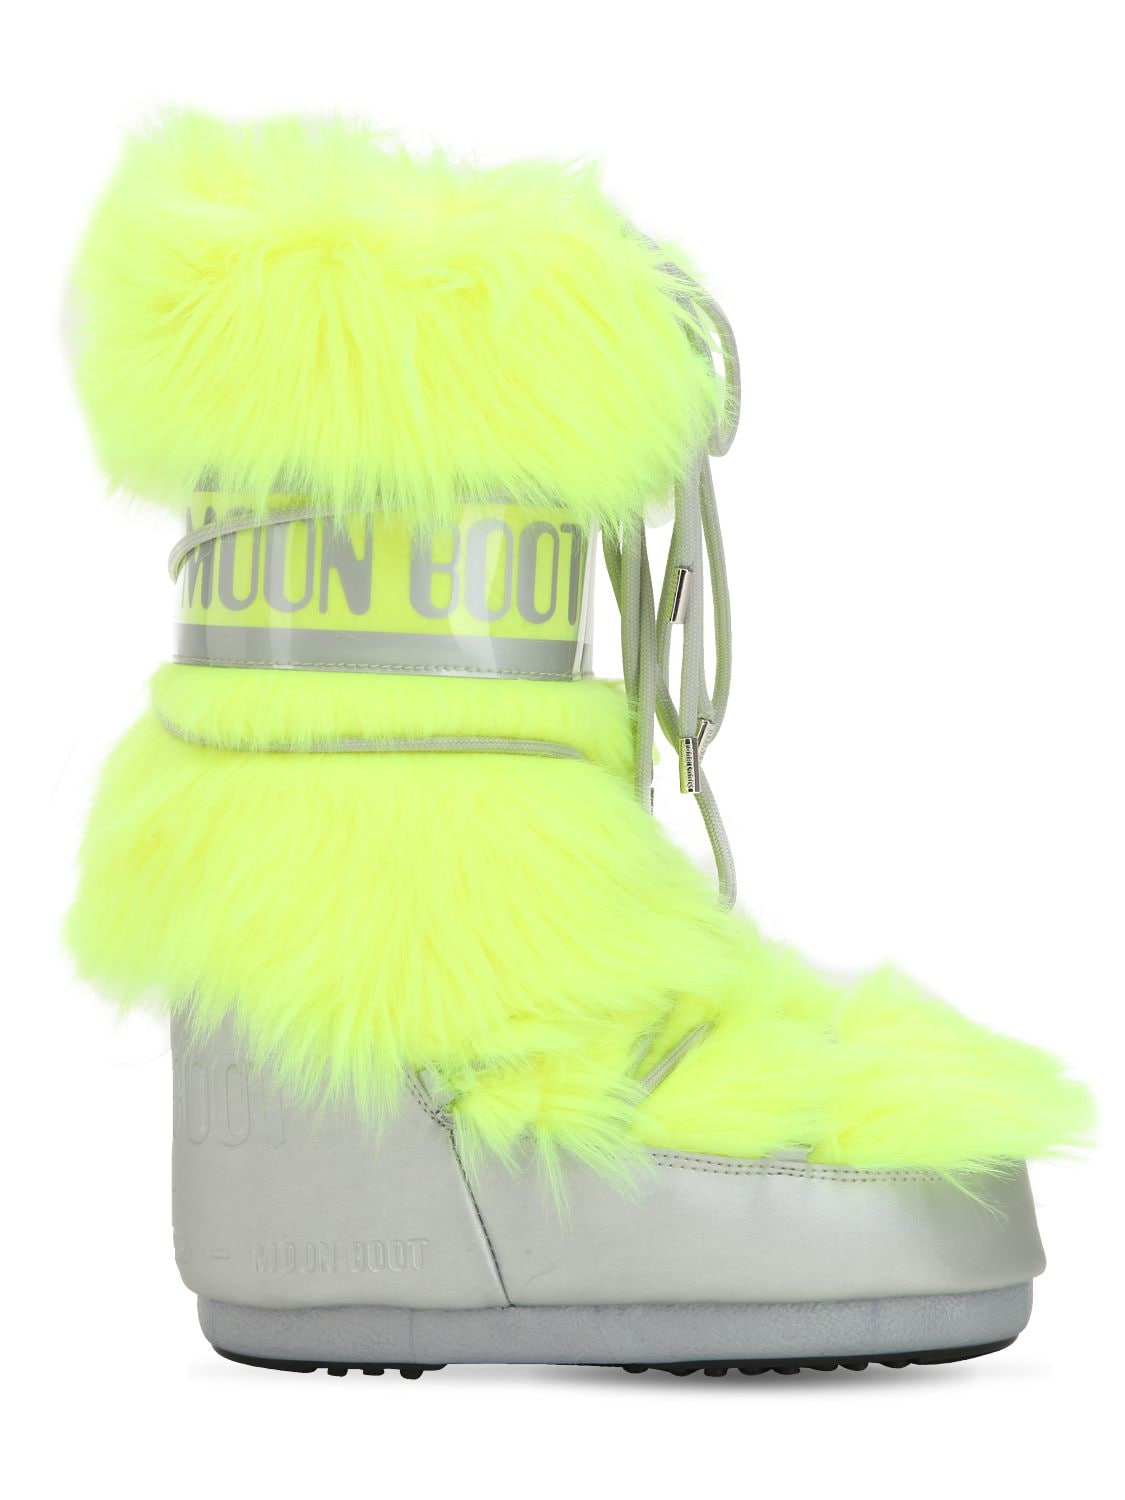 moon boots lime green